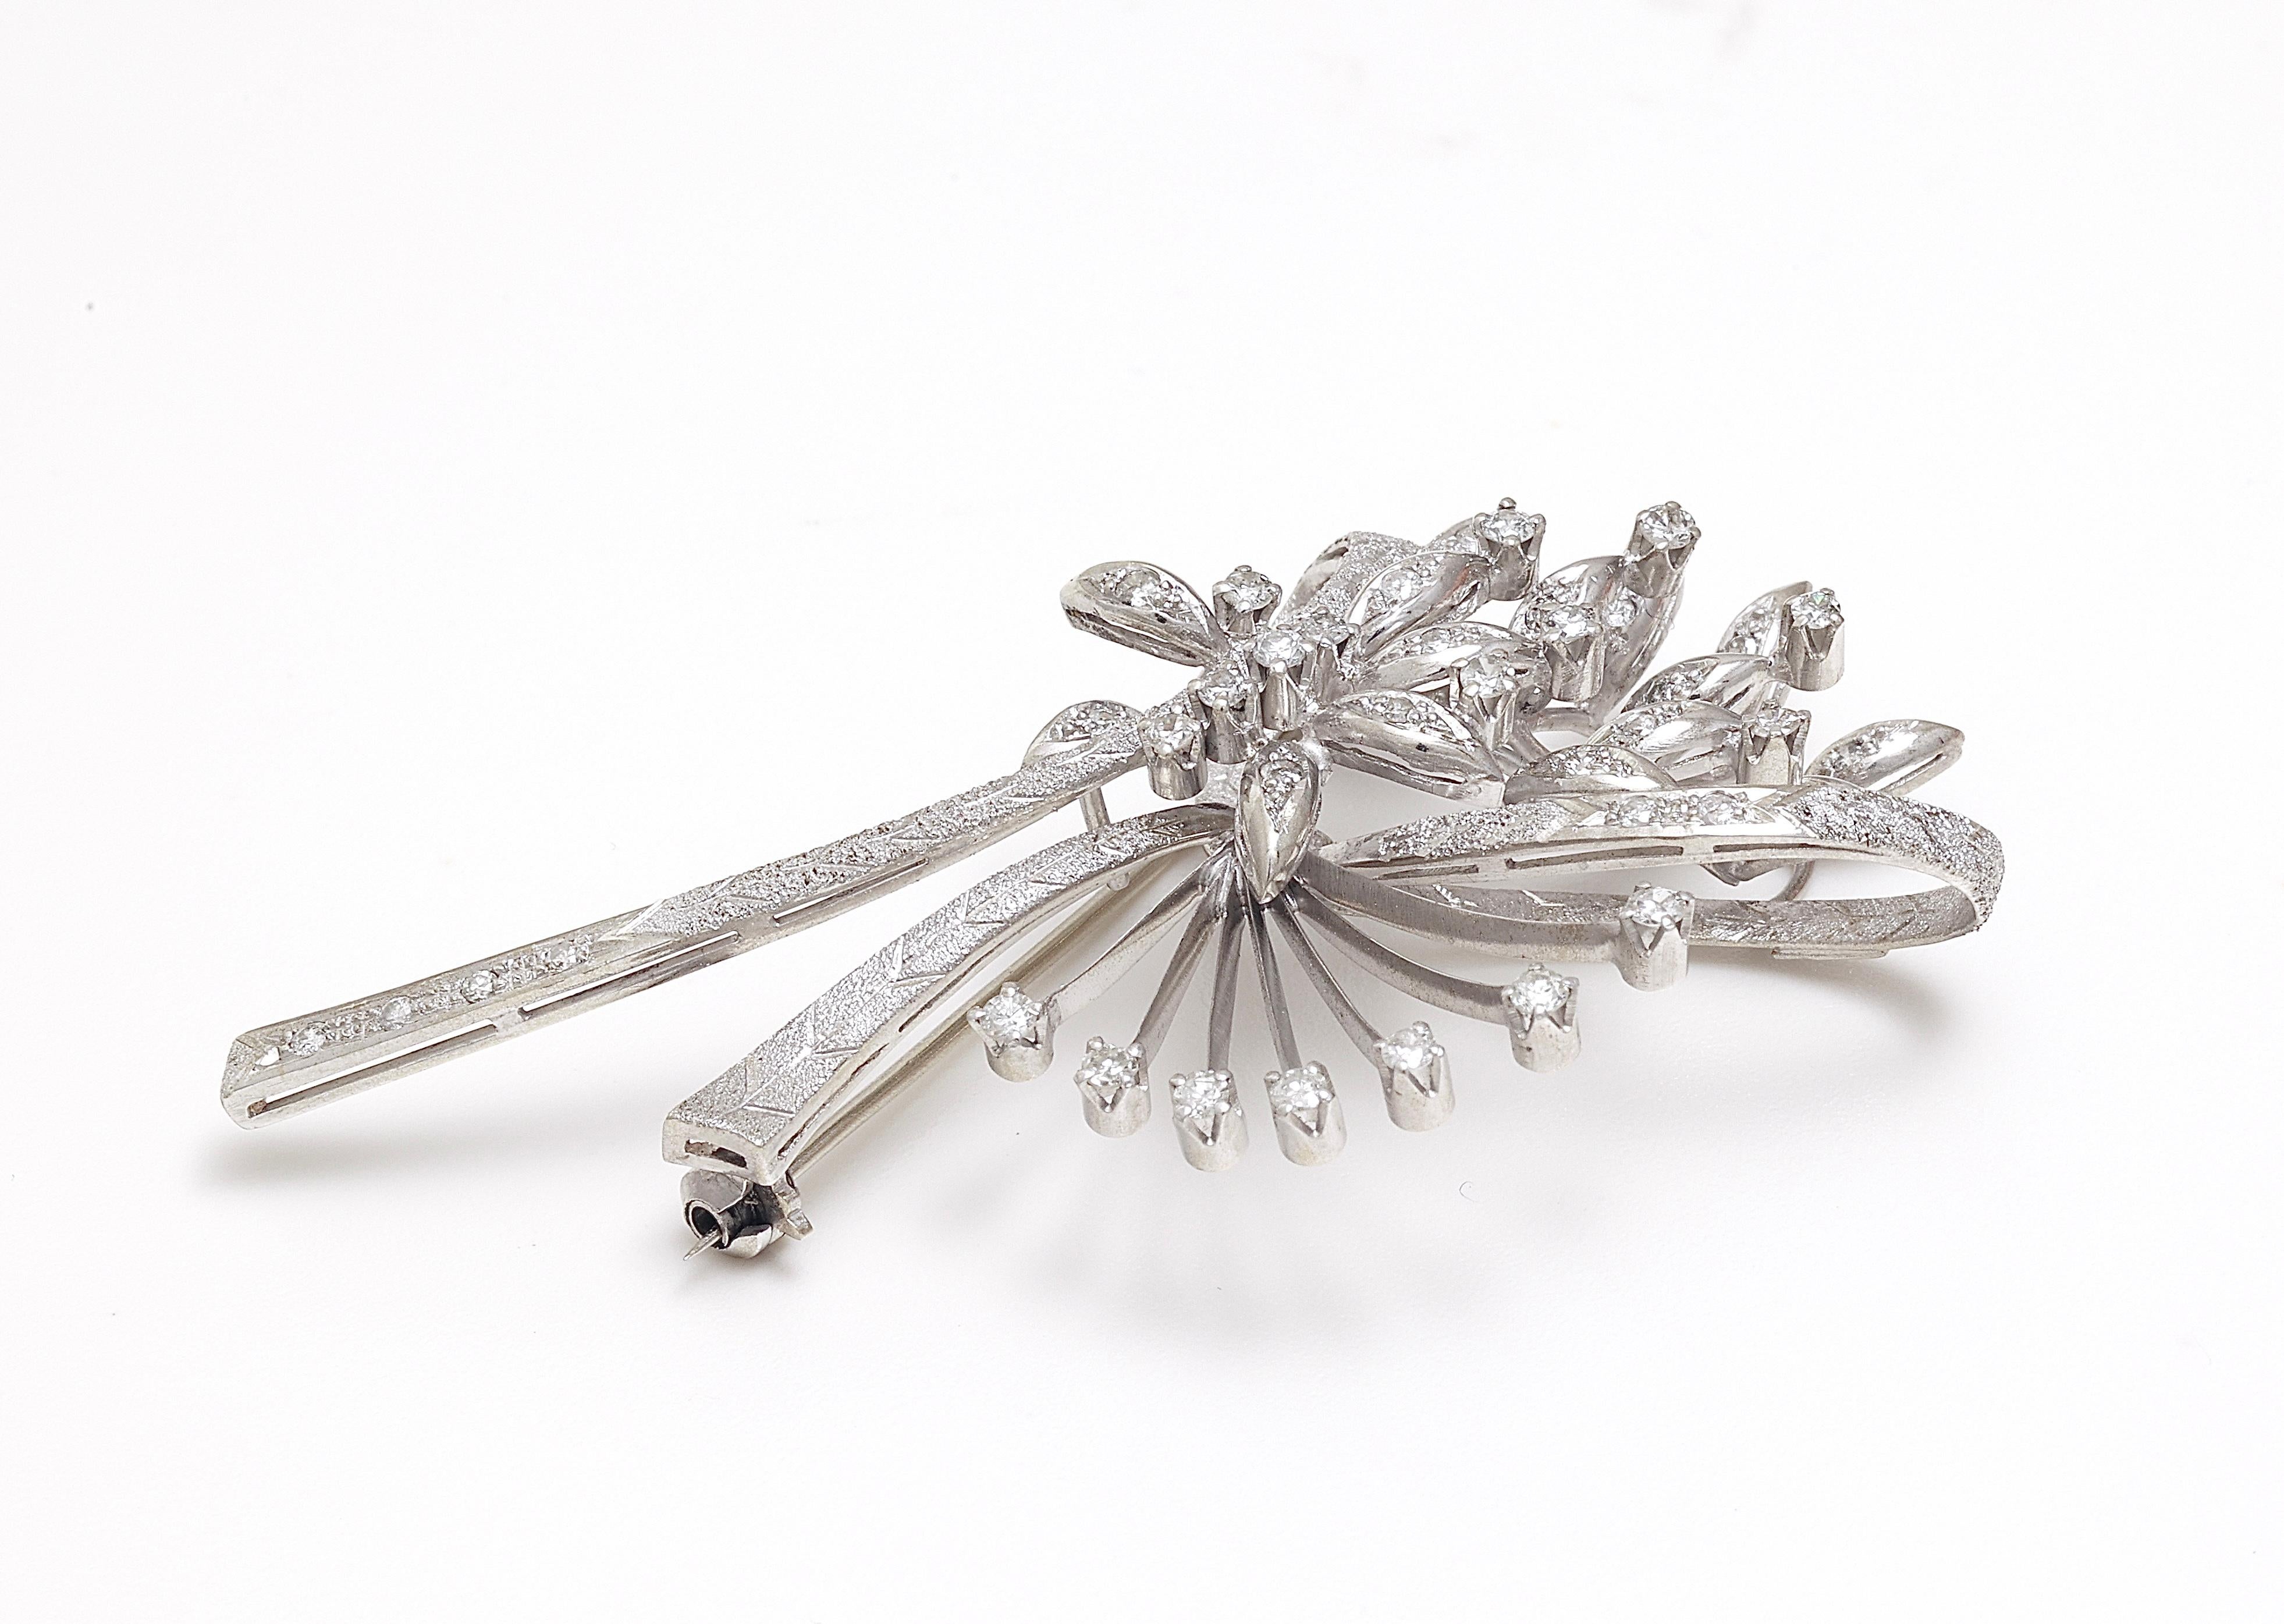  18 kt. White Gold Brooch with 1.52 ct. Brilliant Cut Diamonds For Sale 1